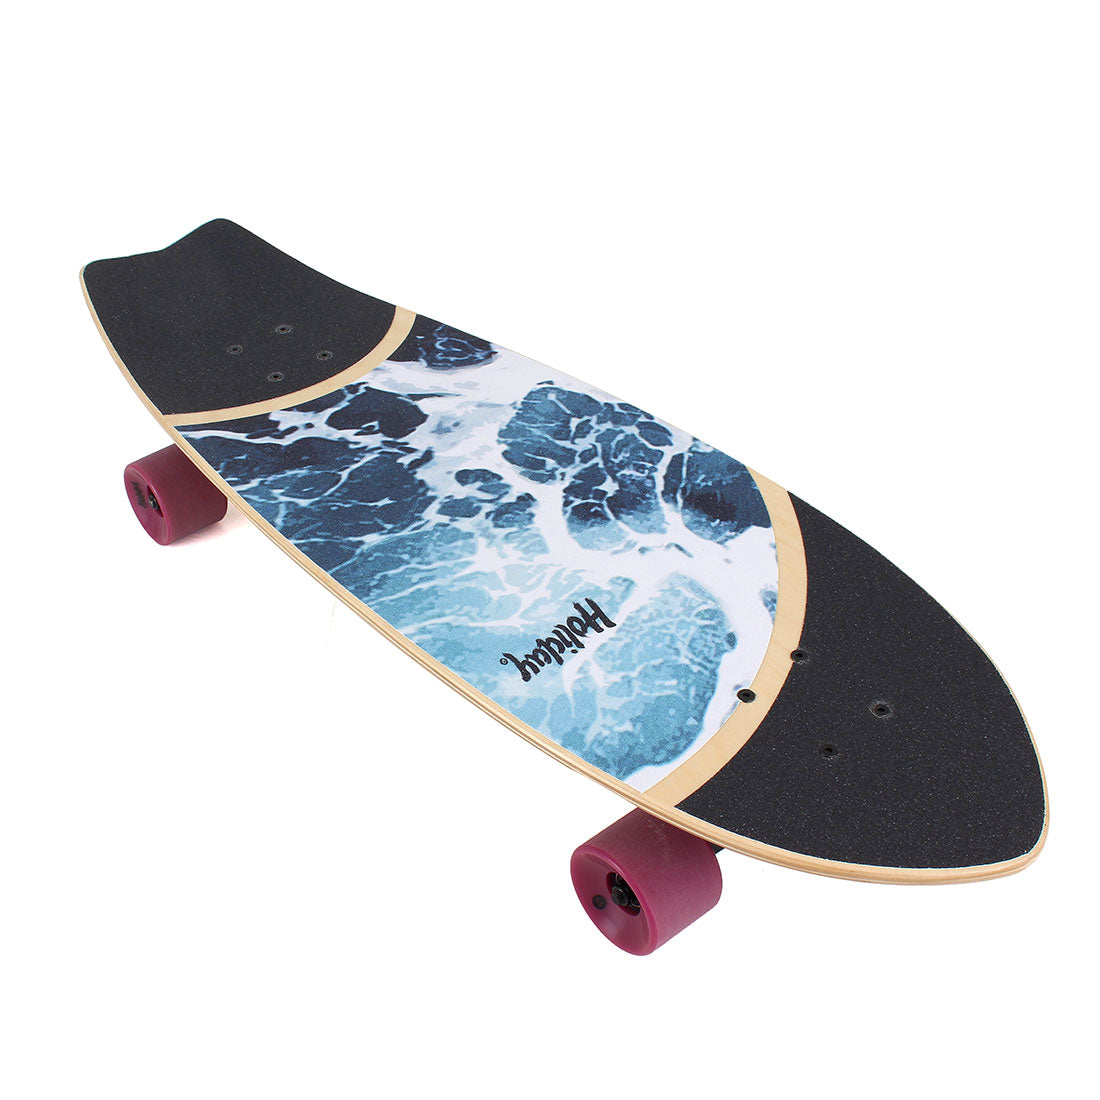 Holiday Surf Skate 31 Complete - Blue Wash Skateboard Compl Carving and Specialty